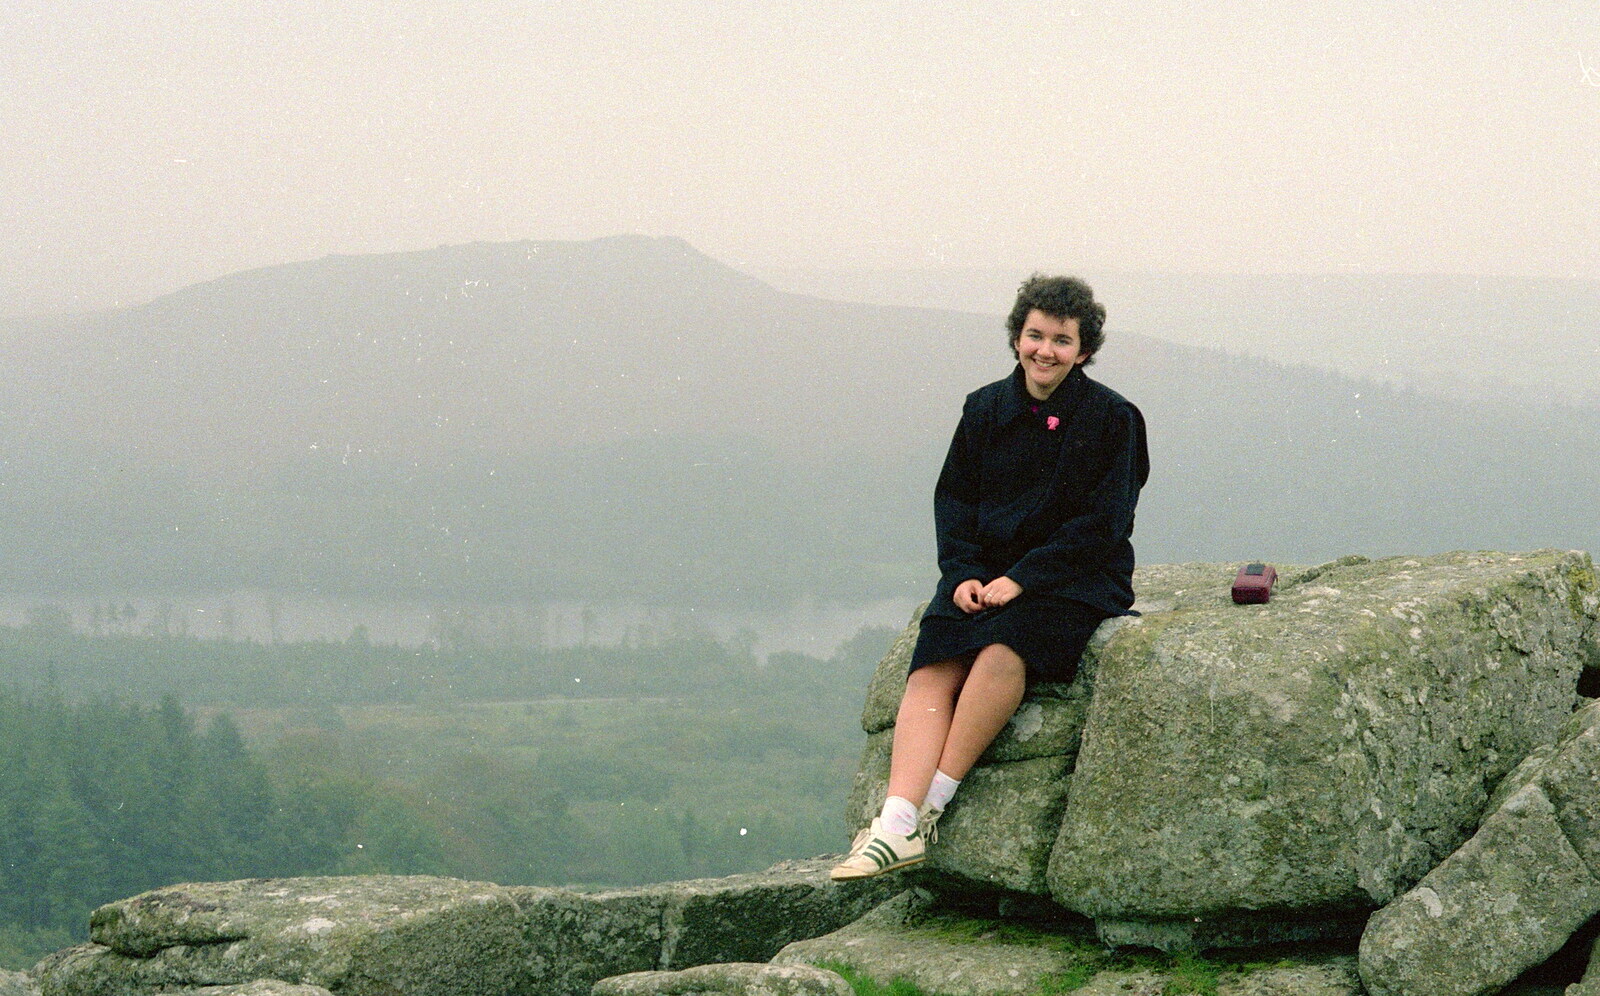 Liz perches on a tor from Uni: First Weeks At Polytechnic, Umbrellas and a Visit From Liz, Plymouth - 26th September 1985